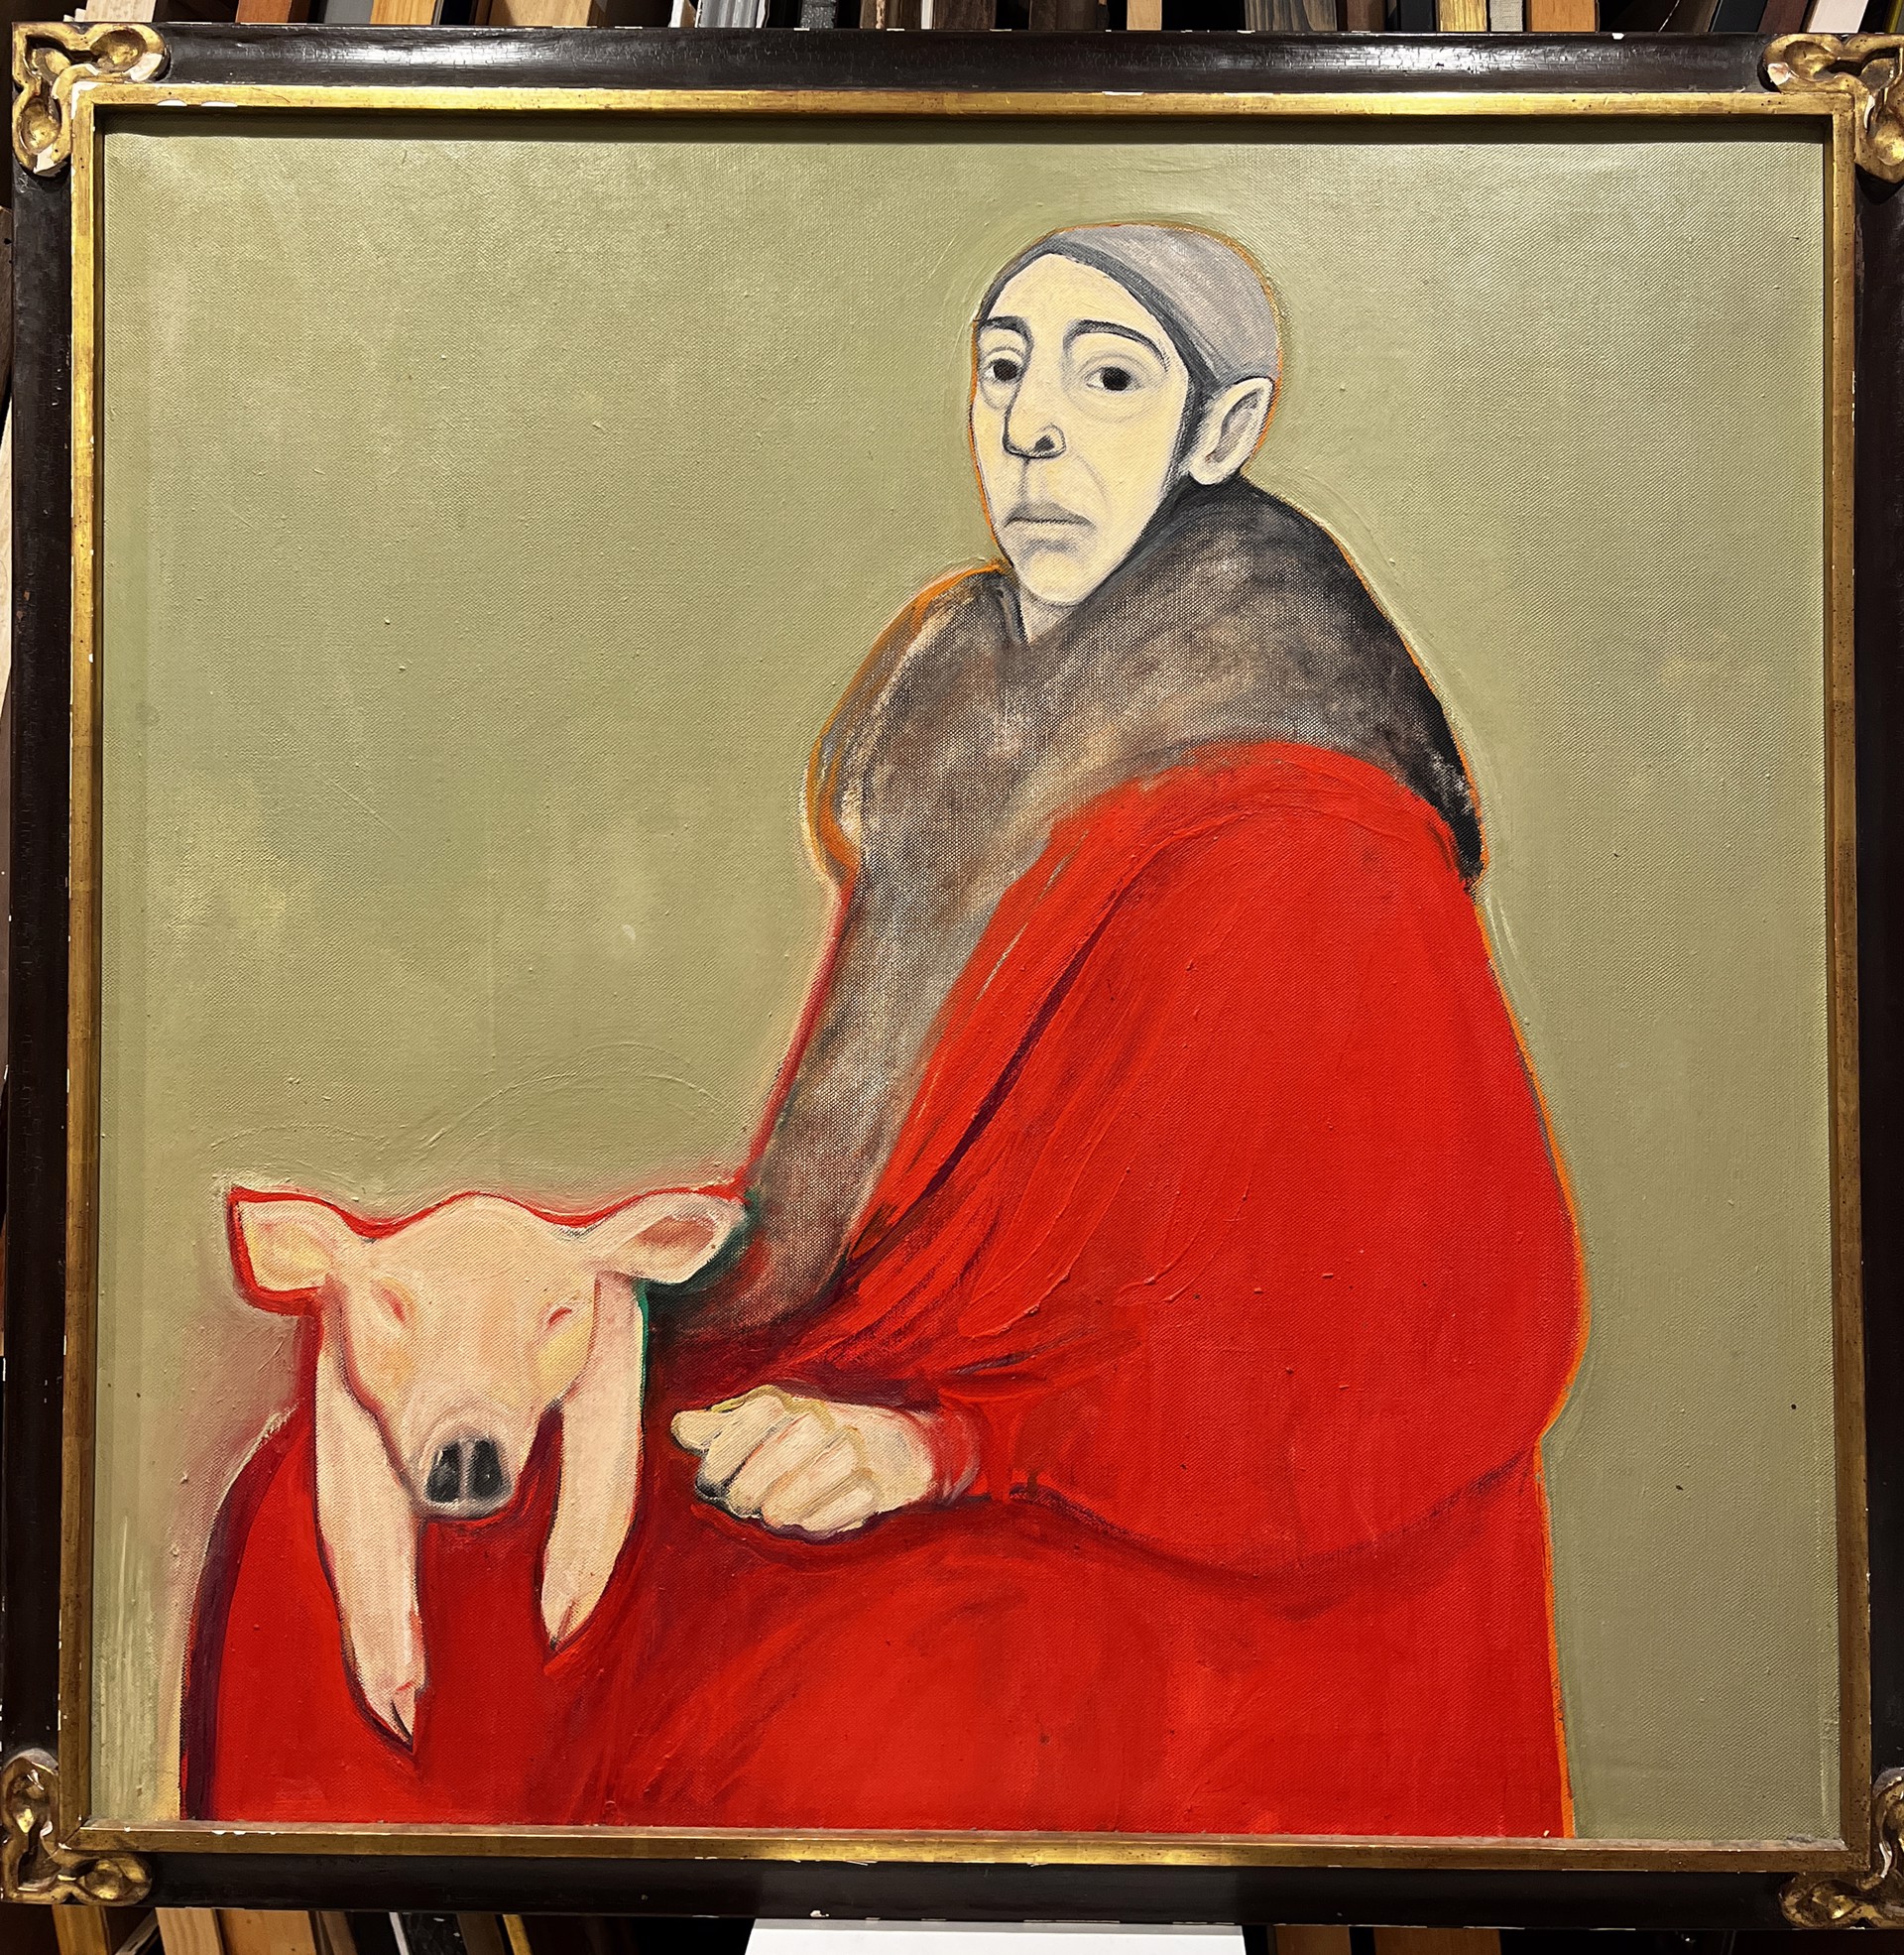 Portrait with Pig by Selina Trieff